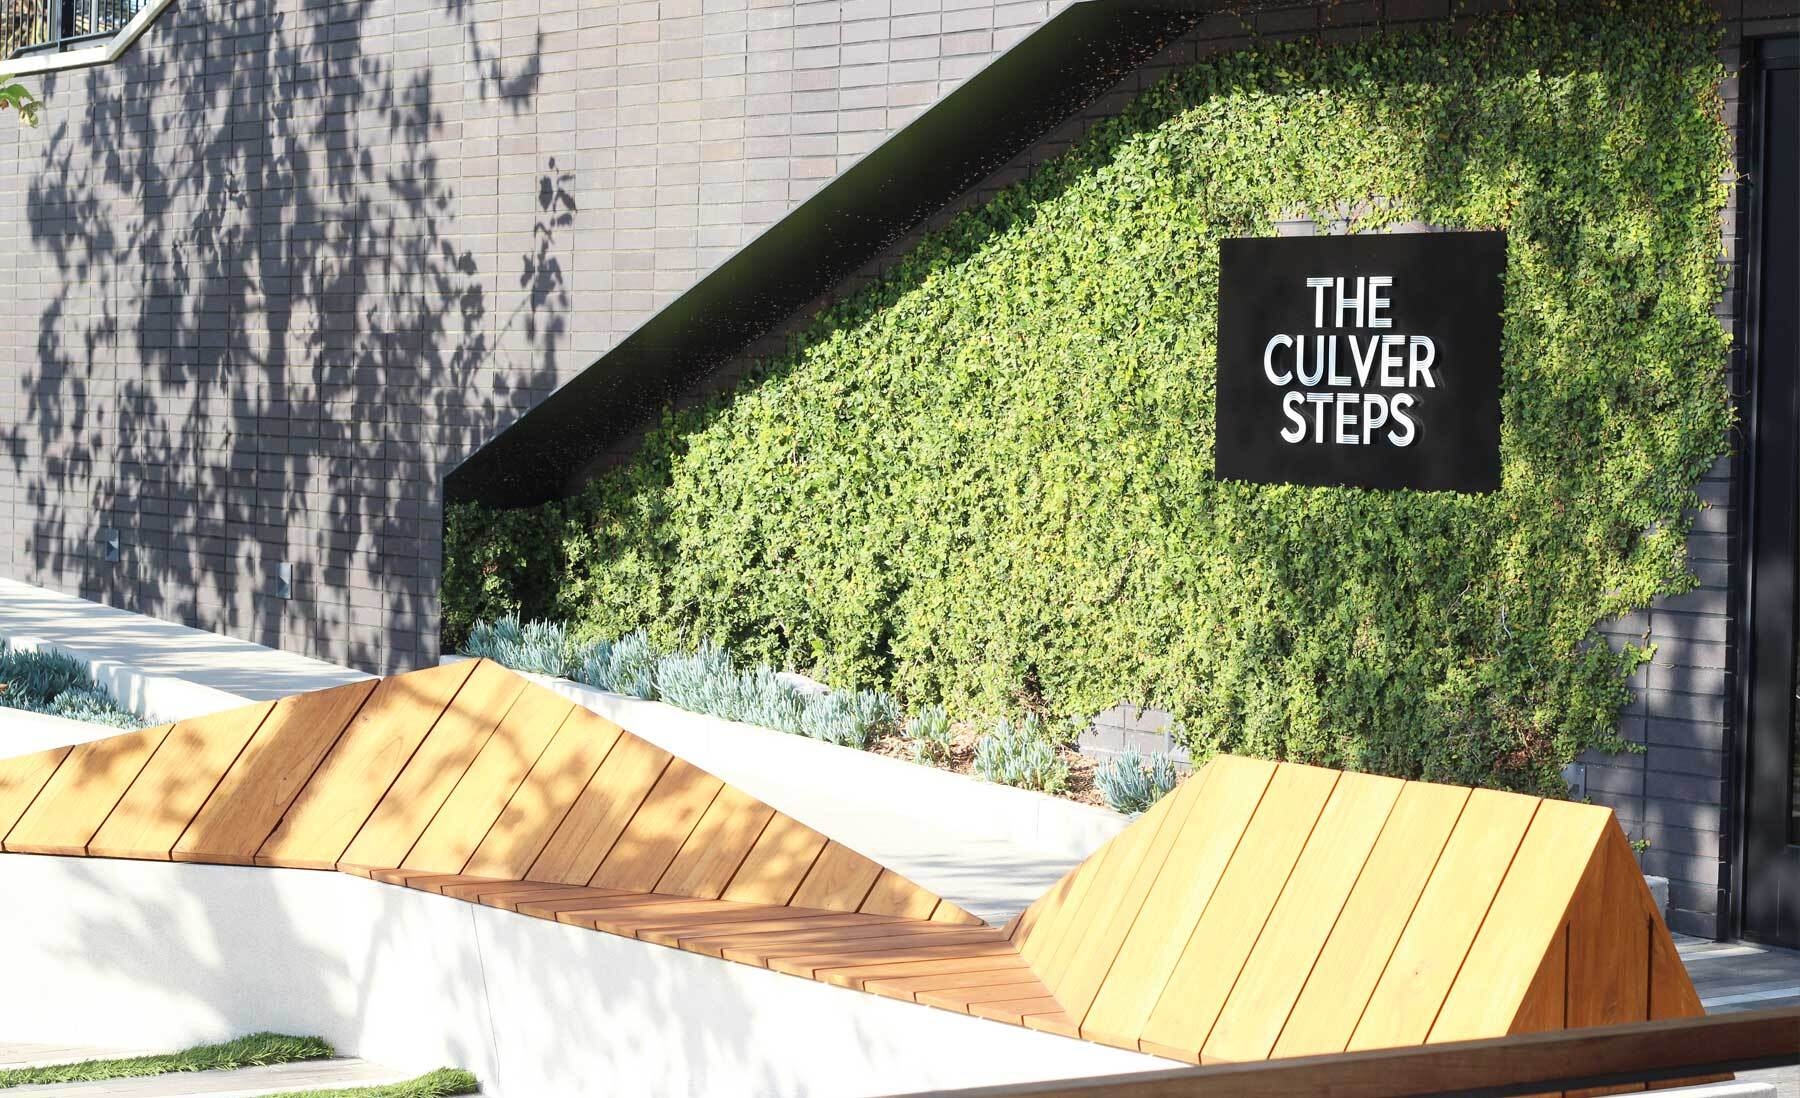 An image of greenery surrounding The Culver Steps office complex